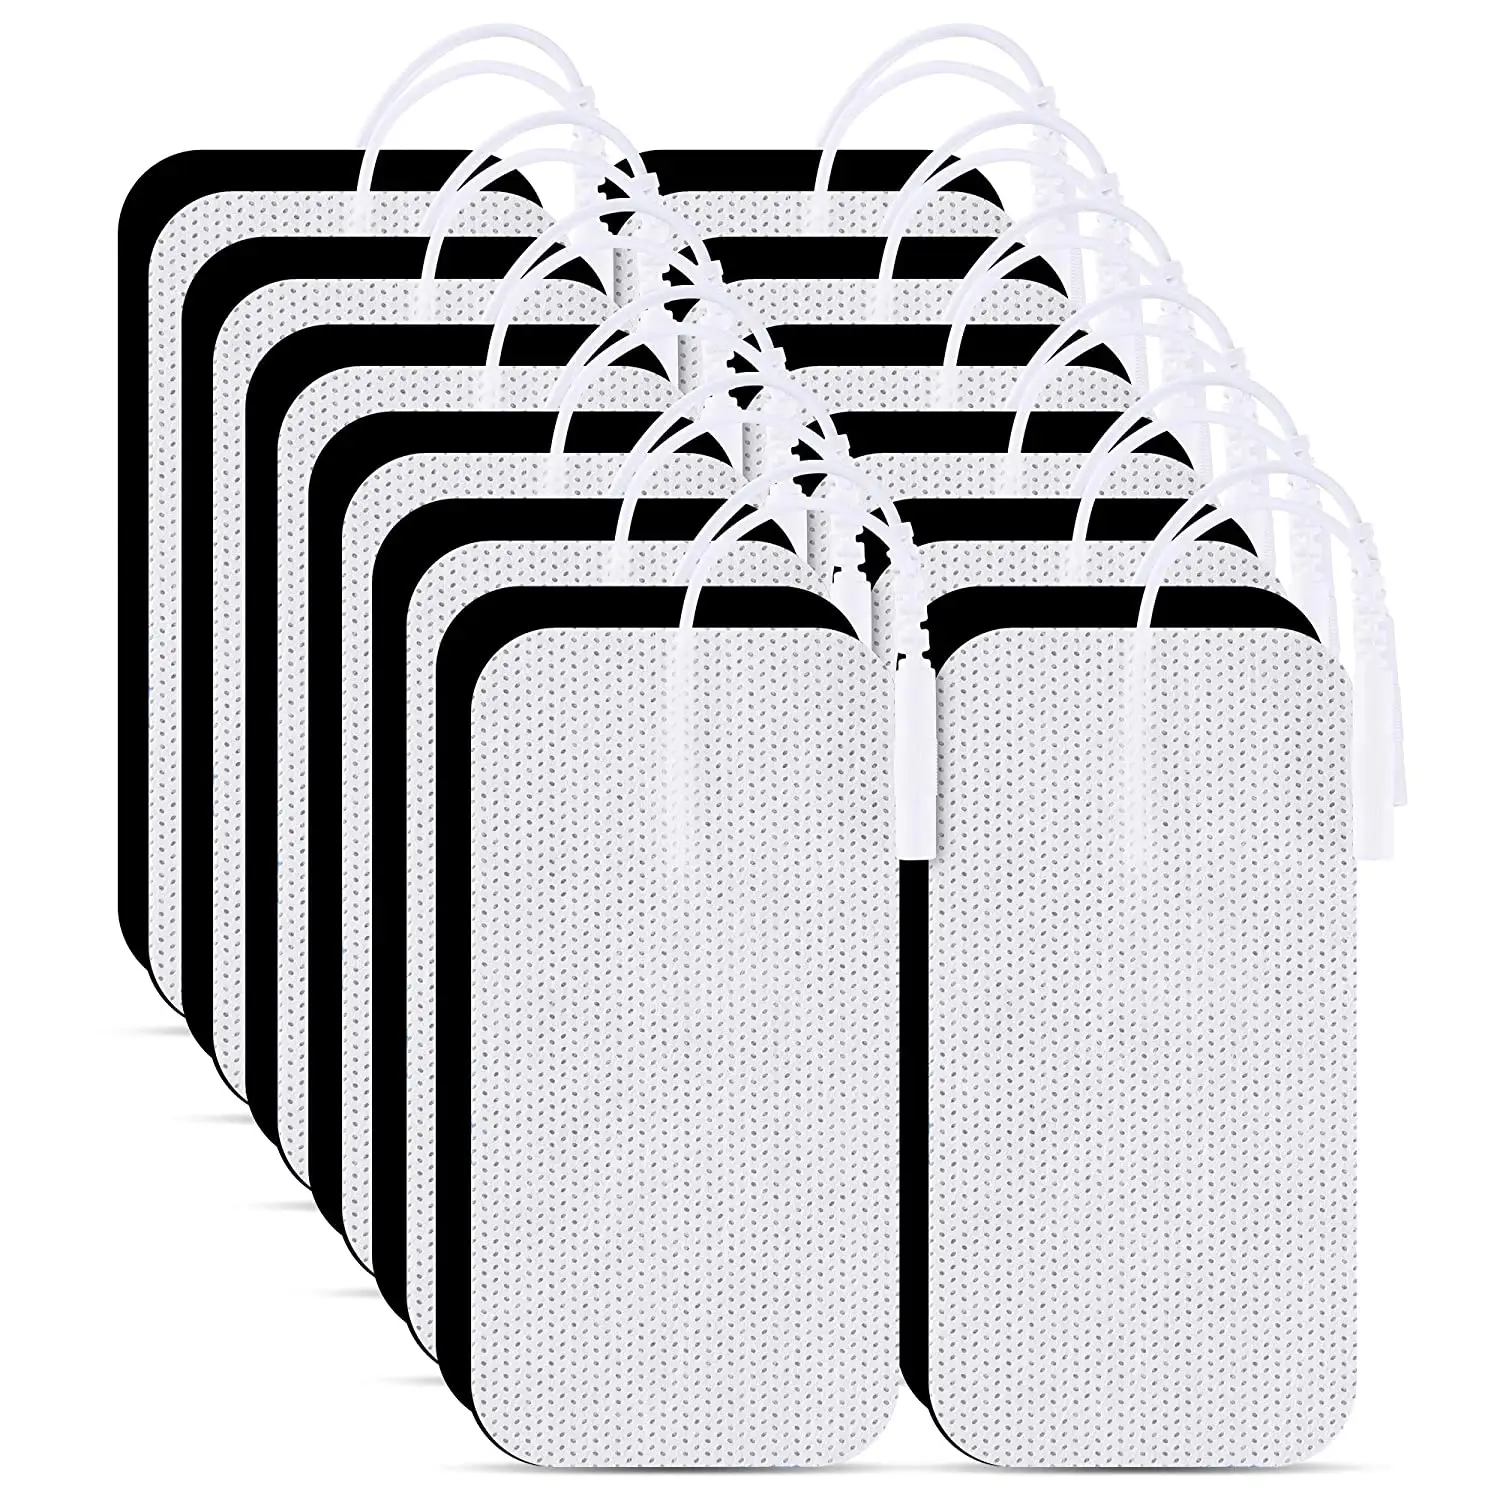 Therapy Electrode Pad For Tens Unit Gel Magnetic Electrode Medical Tens Pads Machine 2X4 Tens Pads Adhesive Electrodes